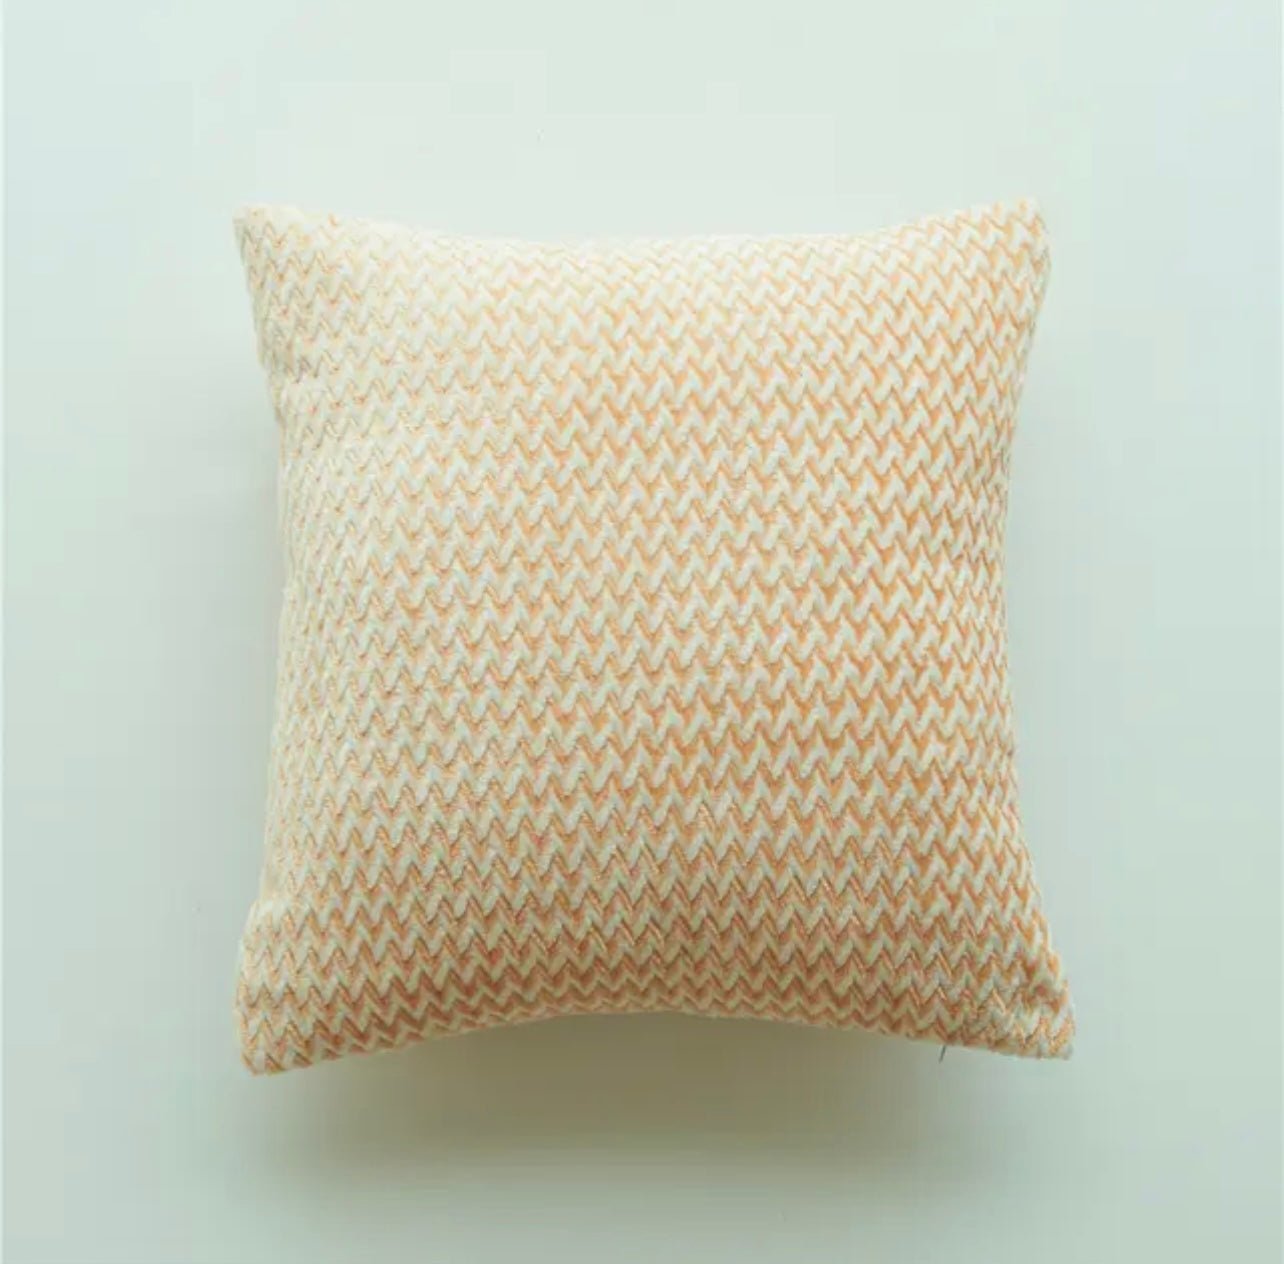 Zig Zag Cushion Cover - Buy Cushion Cover Online at FRANKY'S